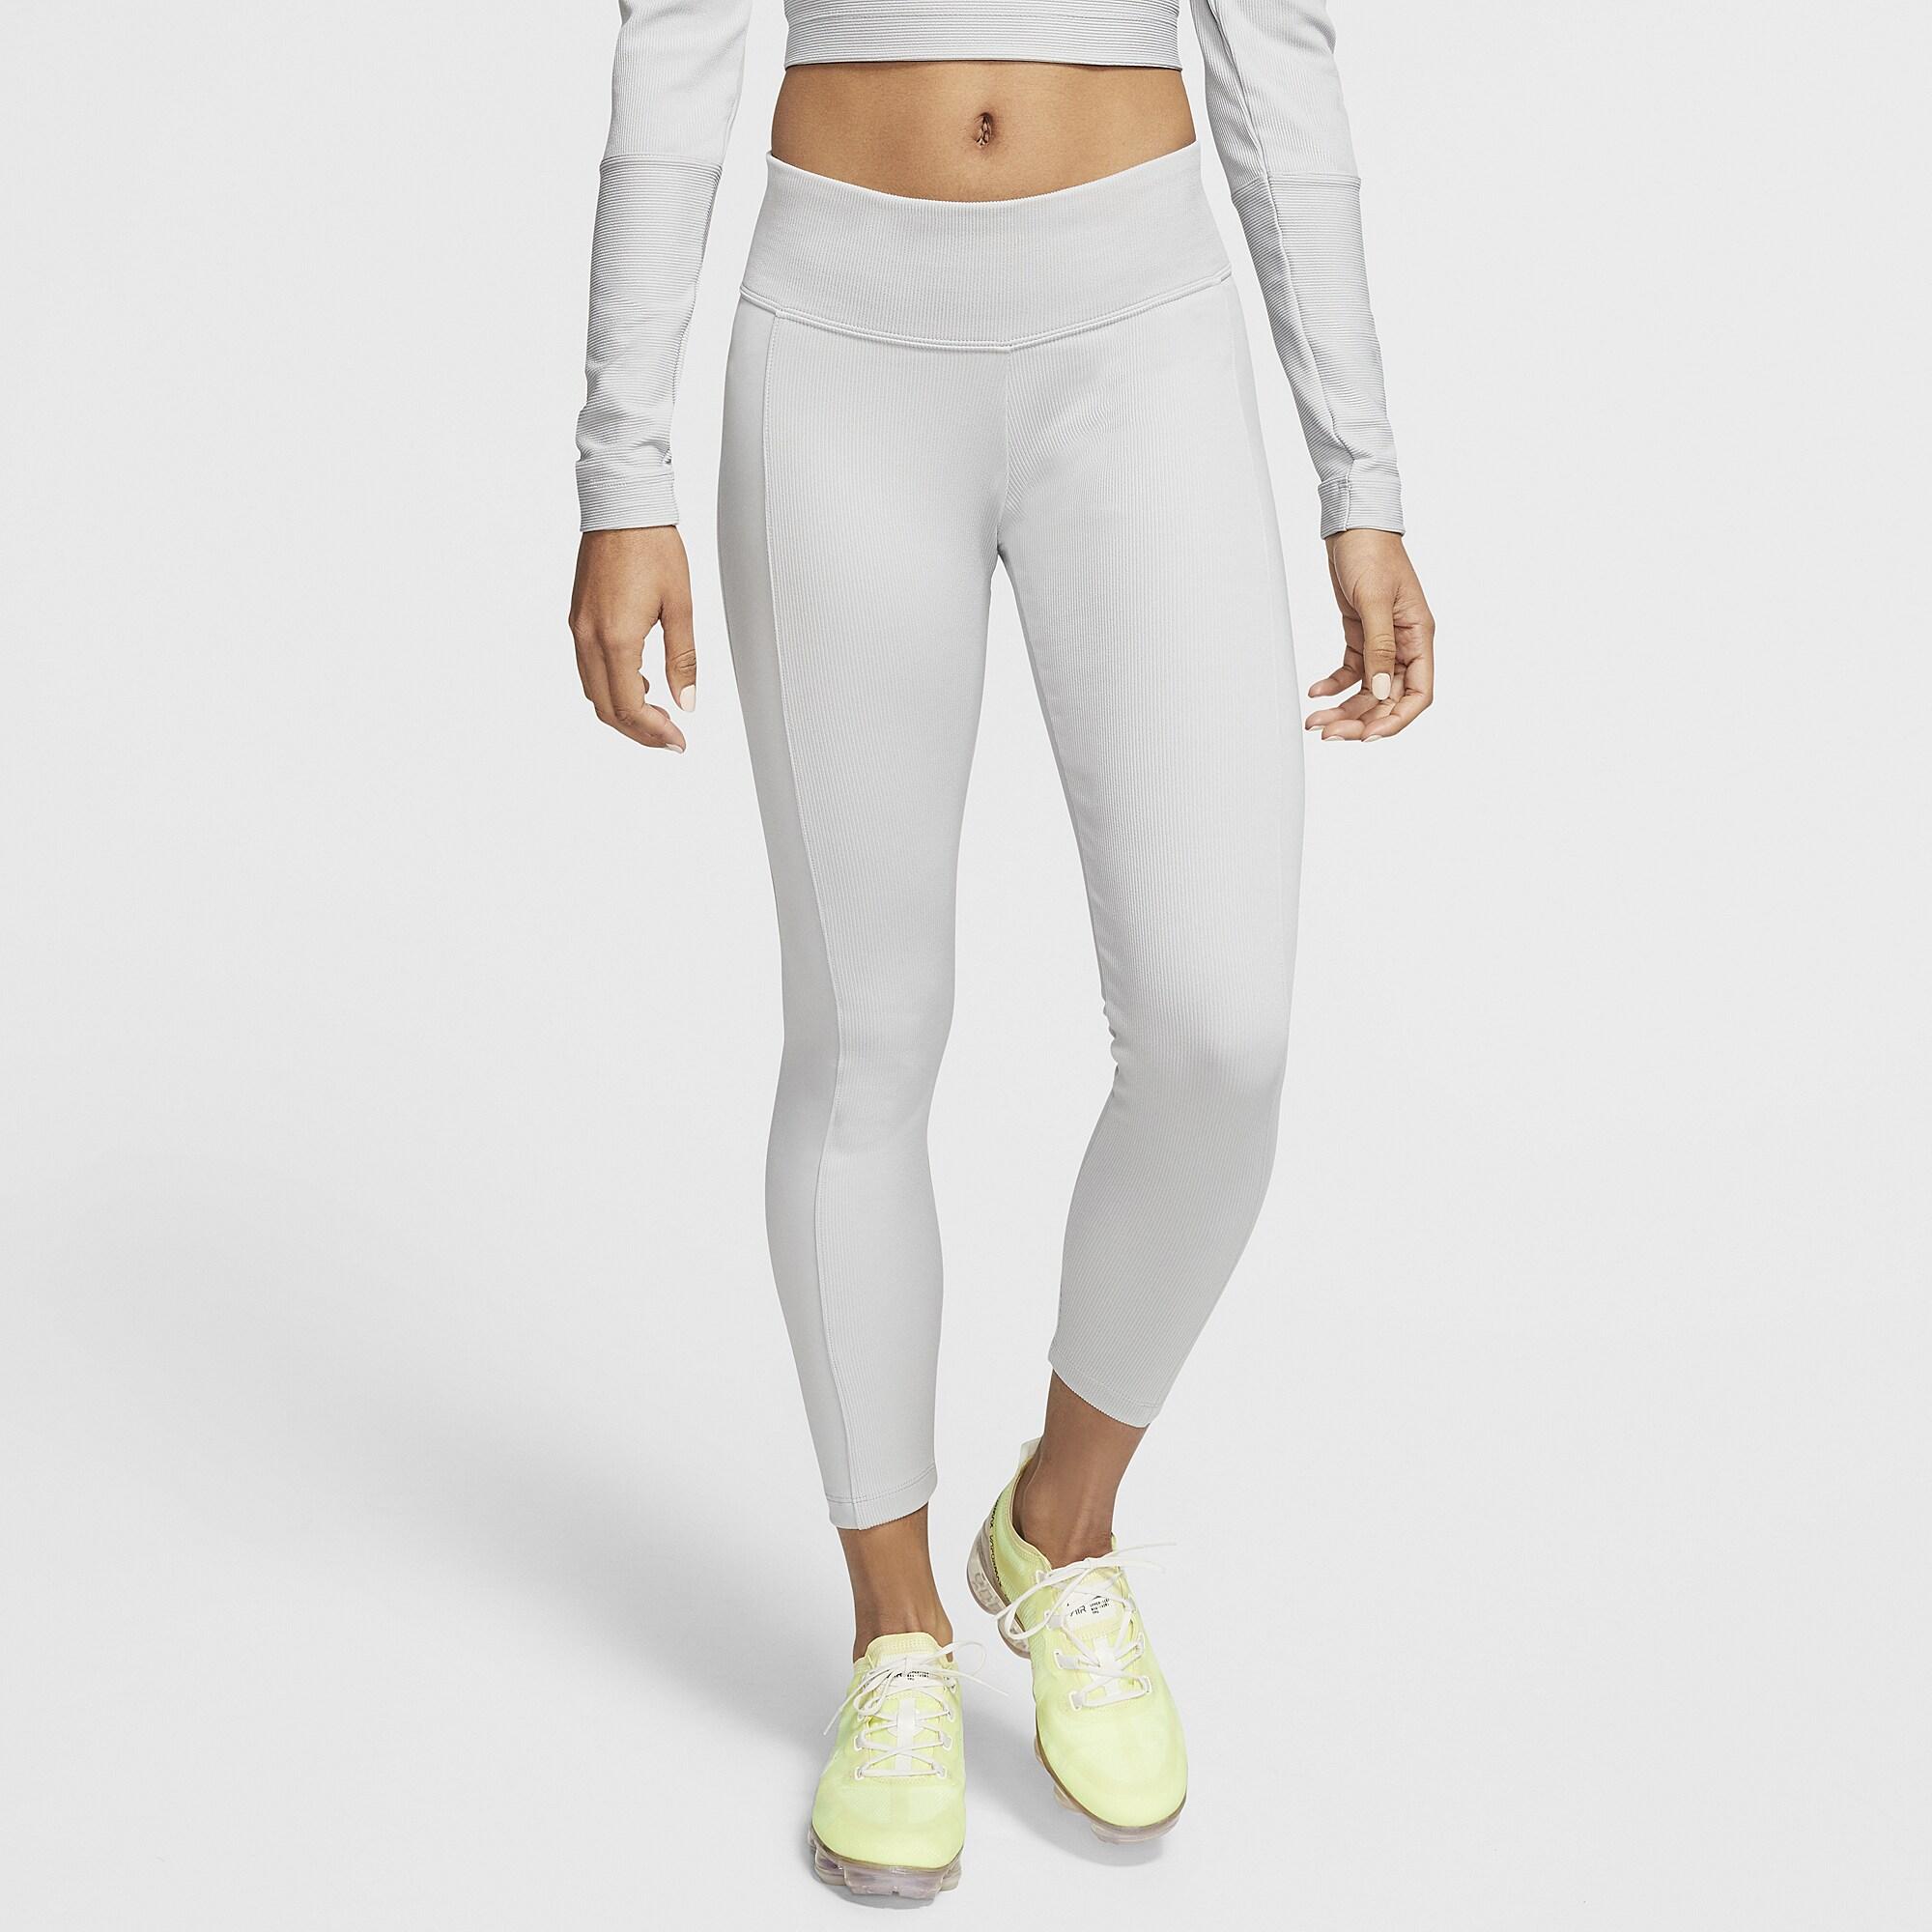 Nike Synthetic Air 7/8 Ribbed Leggings in Light Smoke Grey/Ice Silver  (Gray) - Lyst